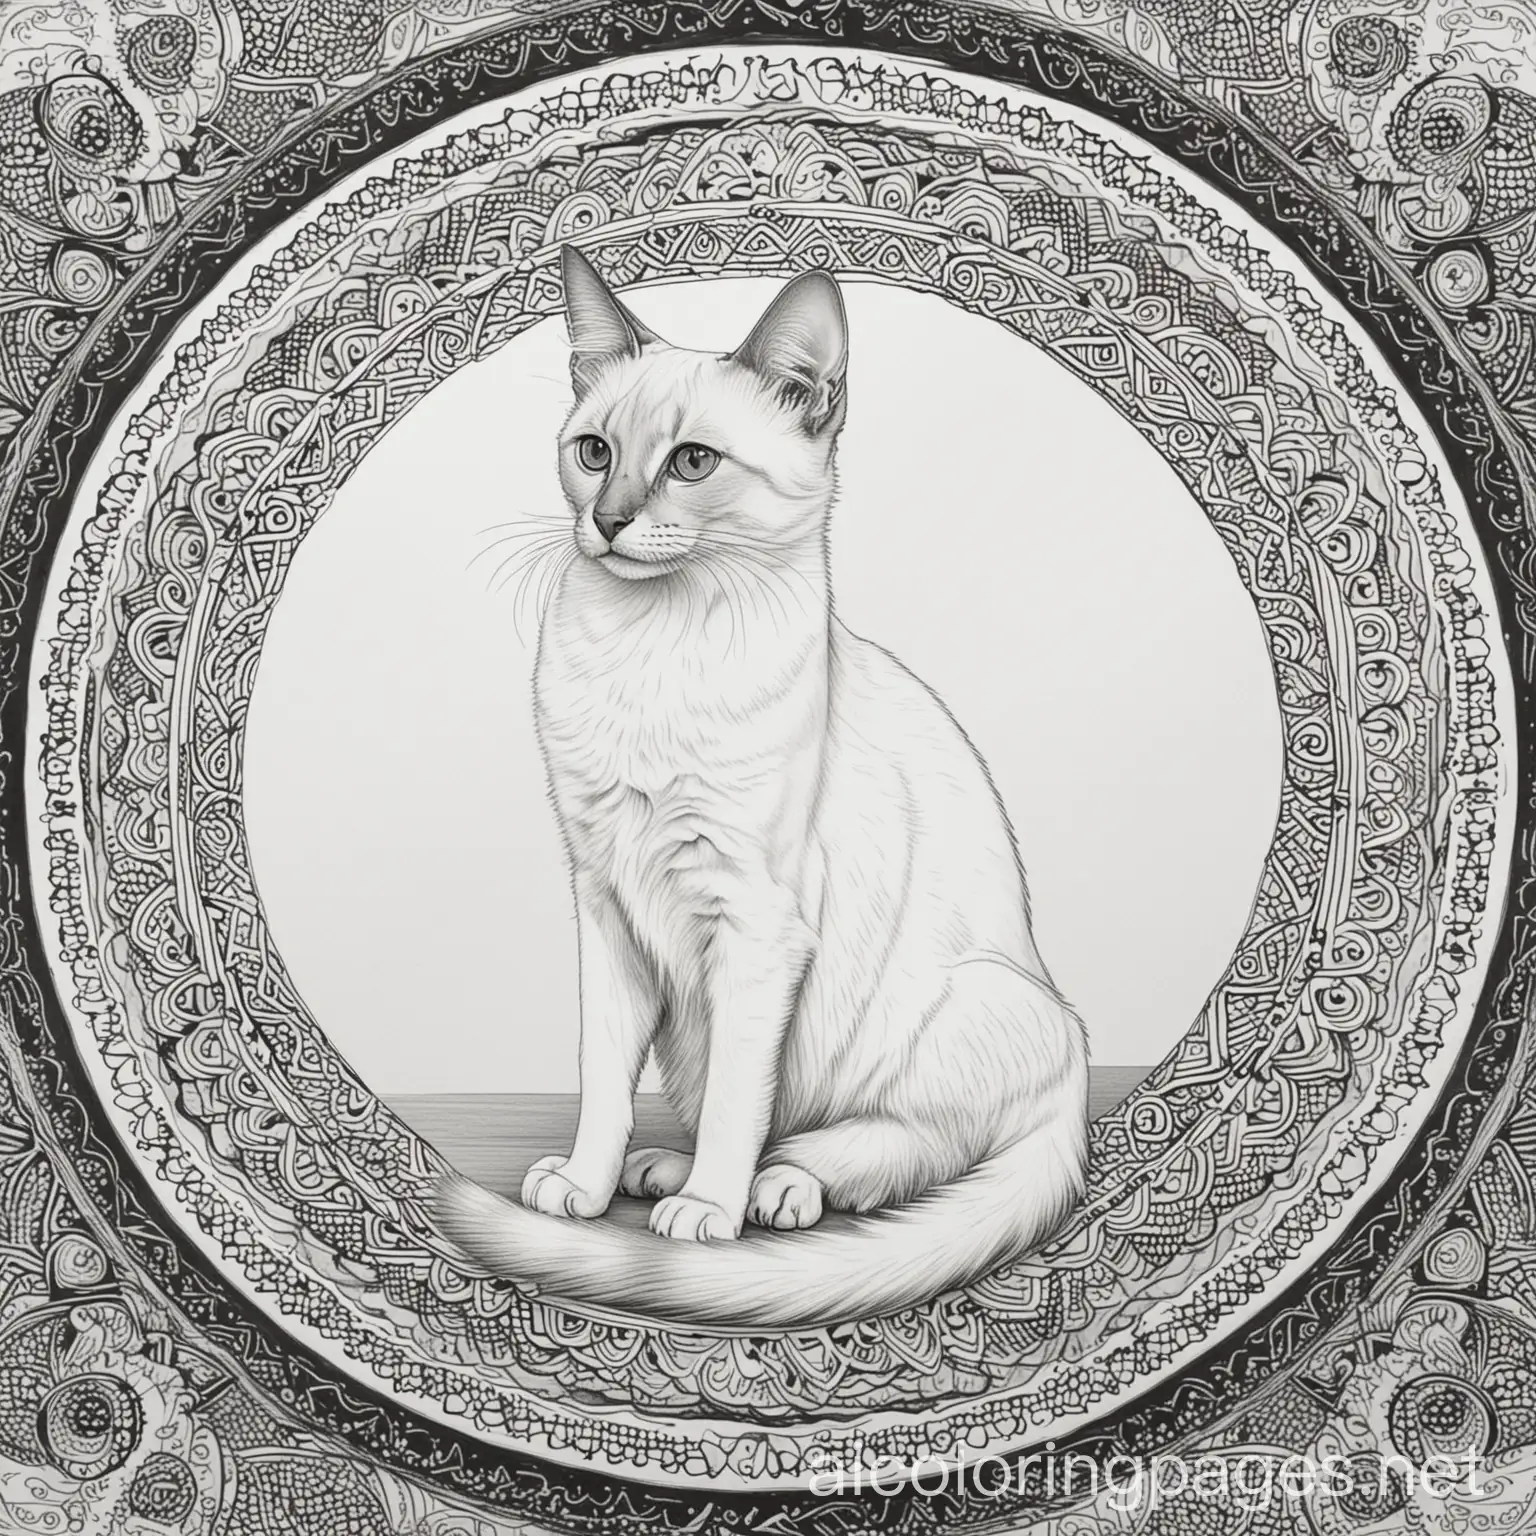 Balinese cat with a space mandala in the background, Coloring Page, black and white, line art, white background, Simplicity, Ample White Space. The background of the coloring page is plain white to make it easy for young children to color within the lines. The outlines of all the subjects are easy to distinguish, making it simple for kids to color without too much difficulty